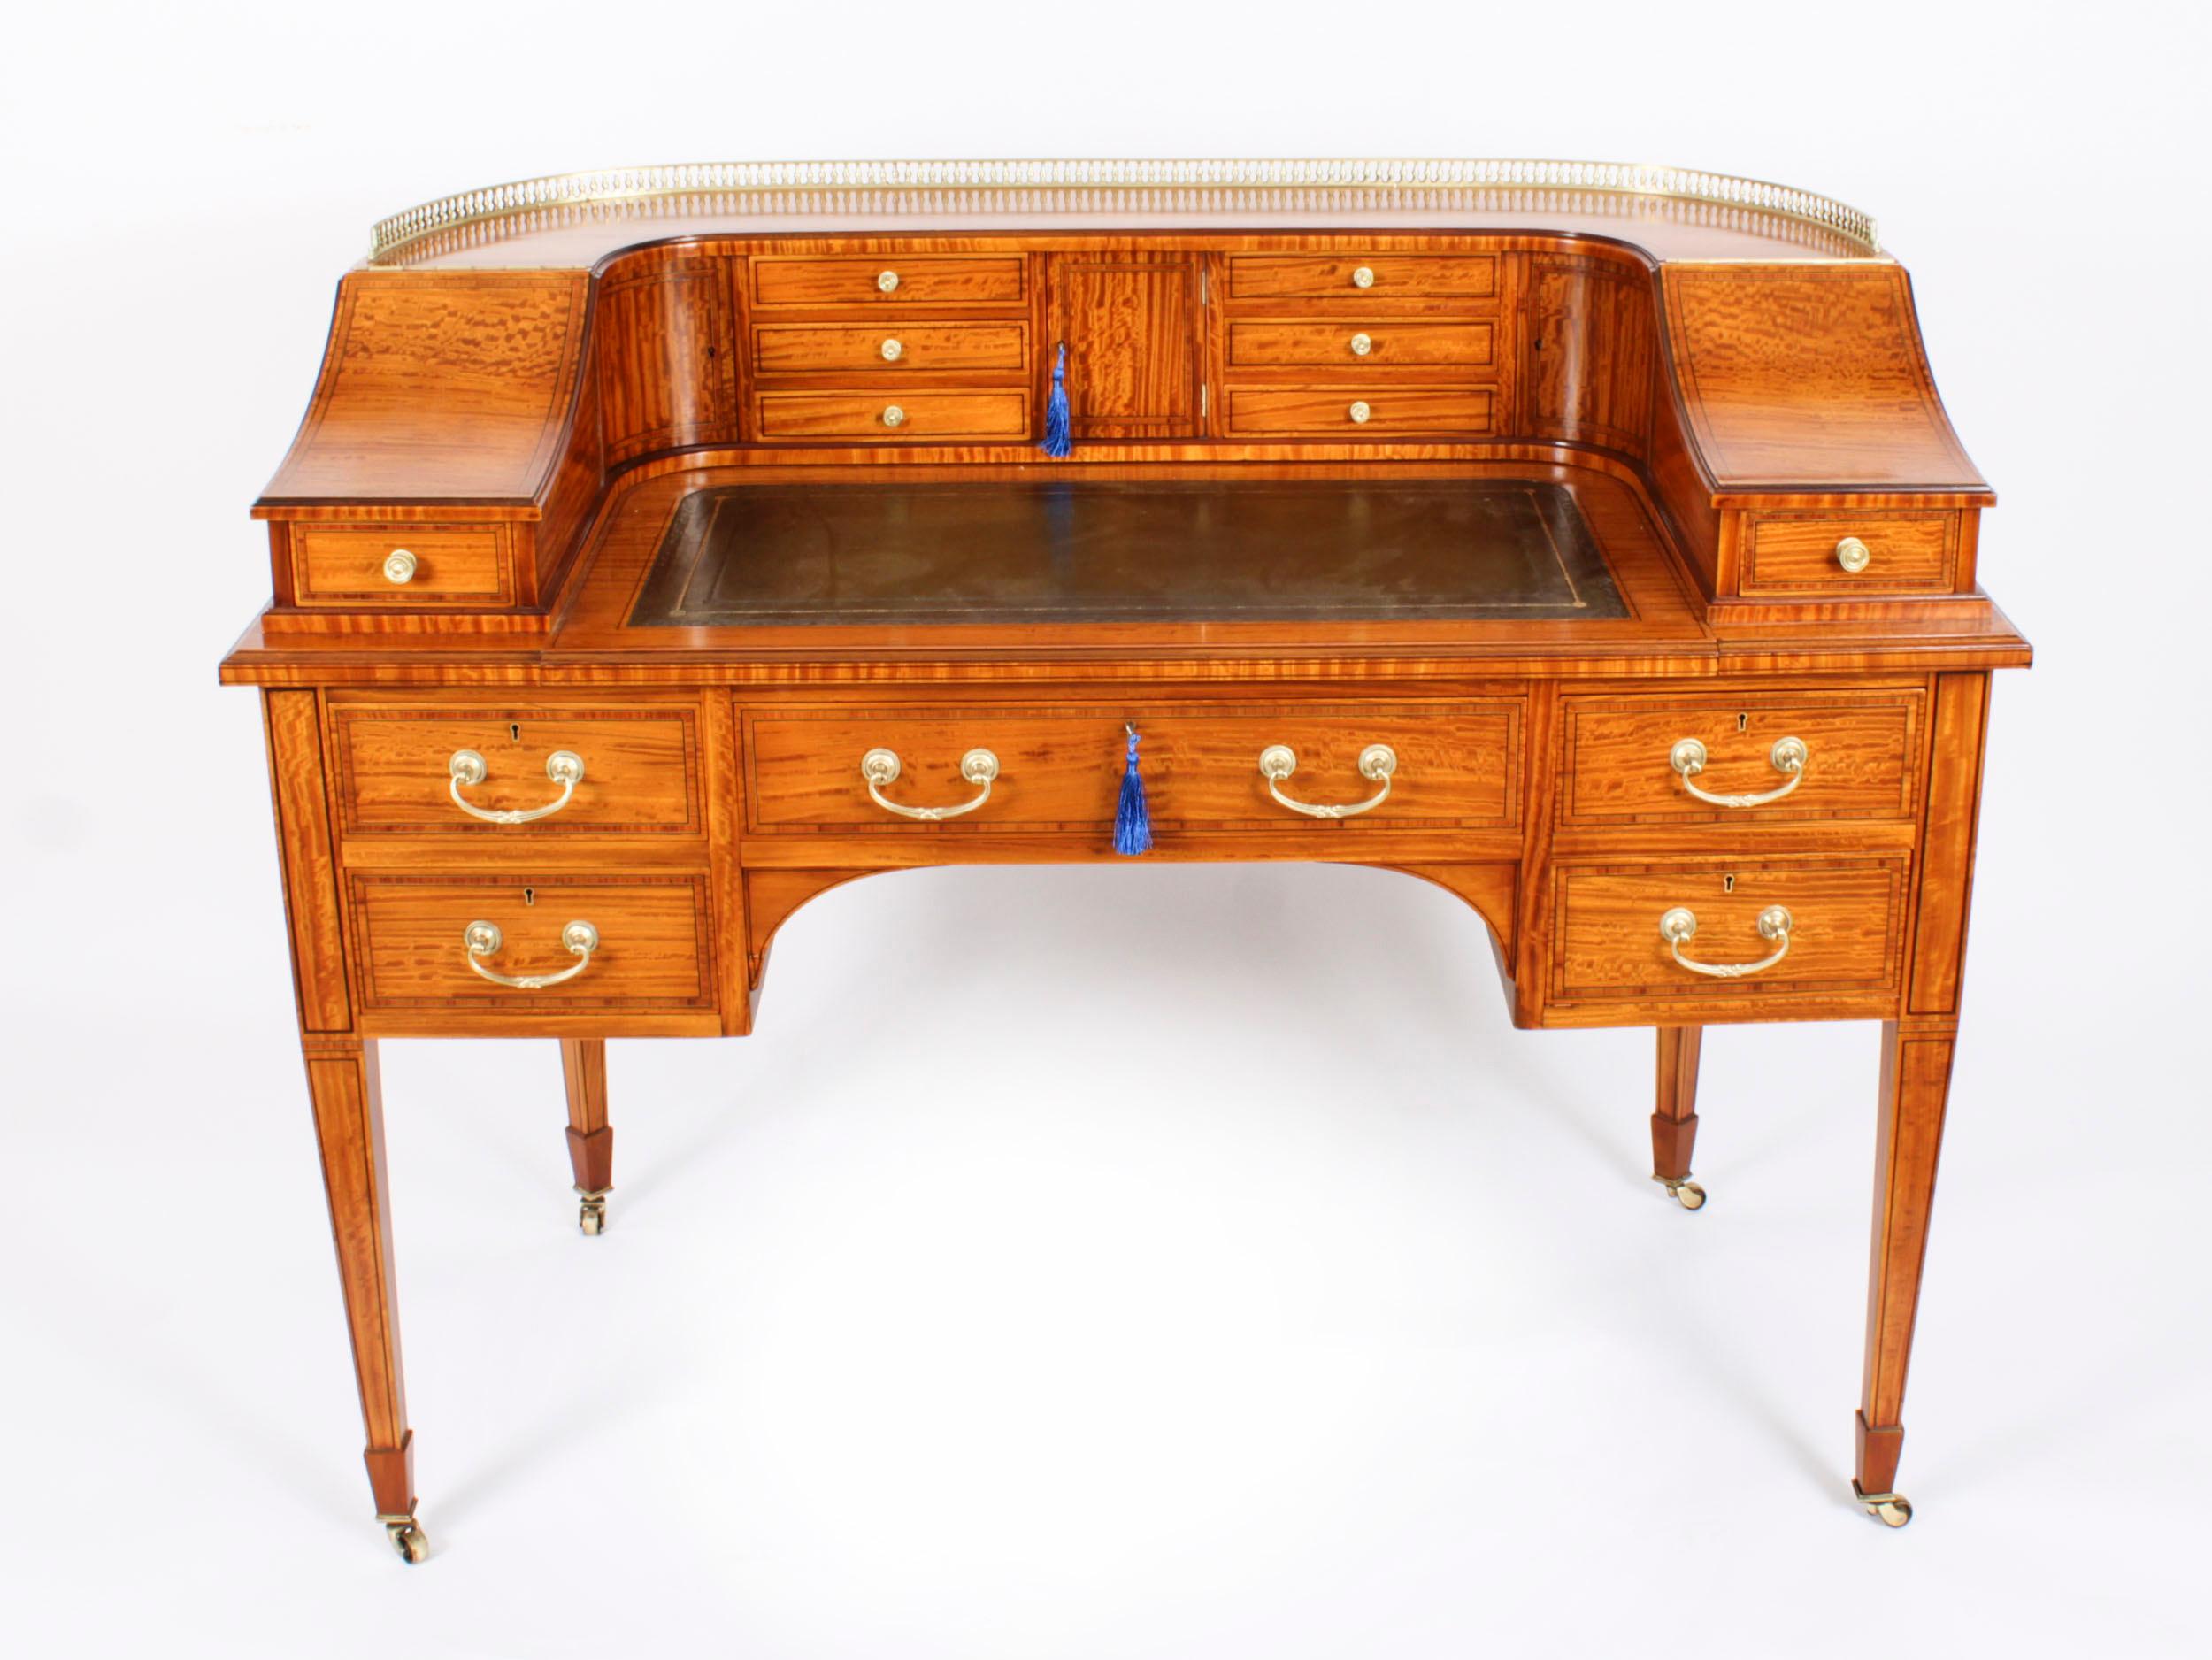 This is a beautiful antique late Victorian satinwood Carlton House Desk,   circa 1880 in date.
This beautiful desk is made from satinwood, which has been crossbanded in tulip wood bordered with boxwood and ebony lines   It is superbly finished all